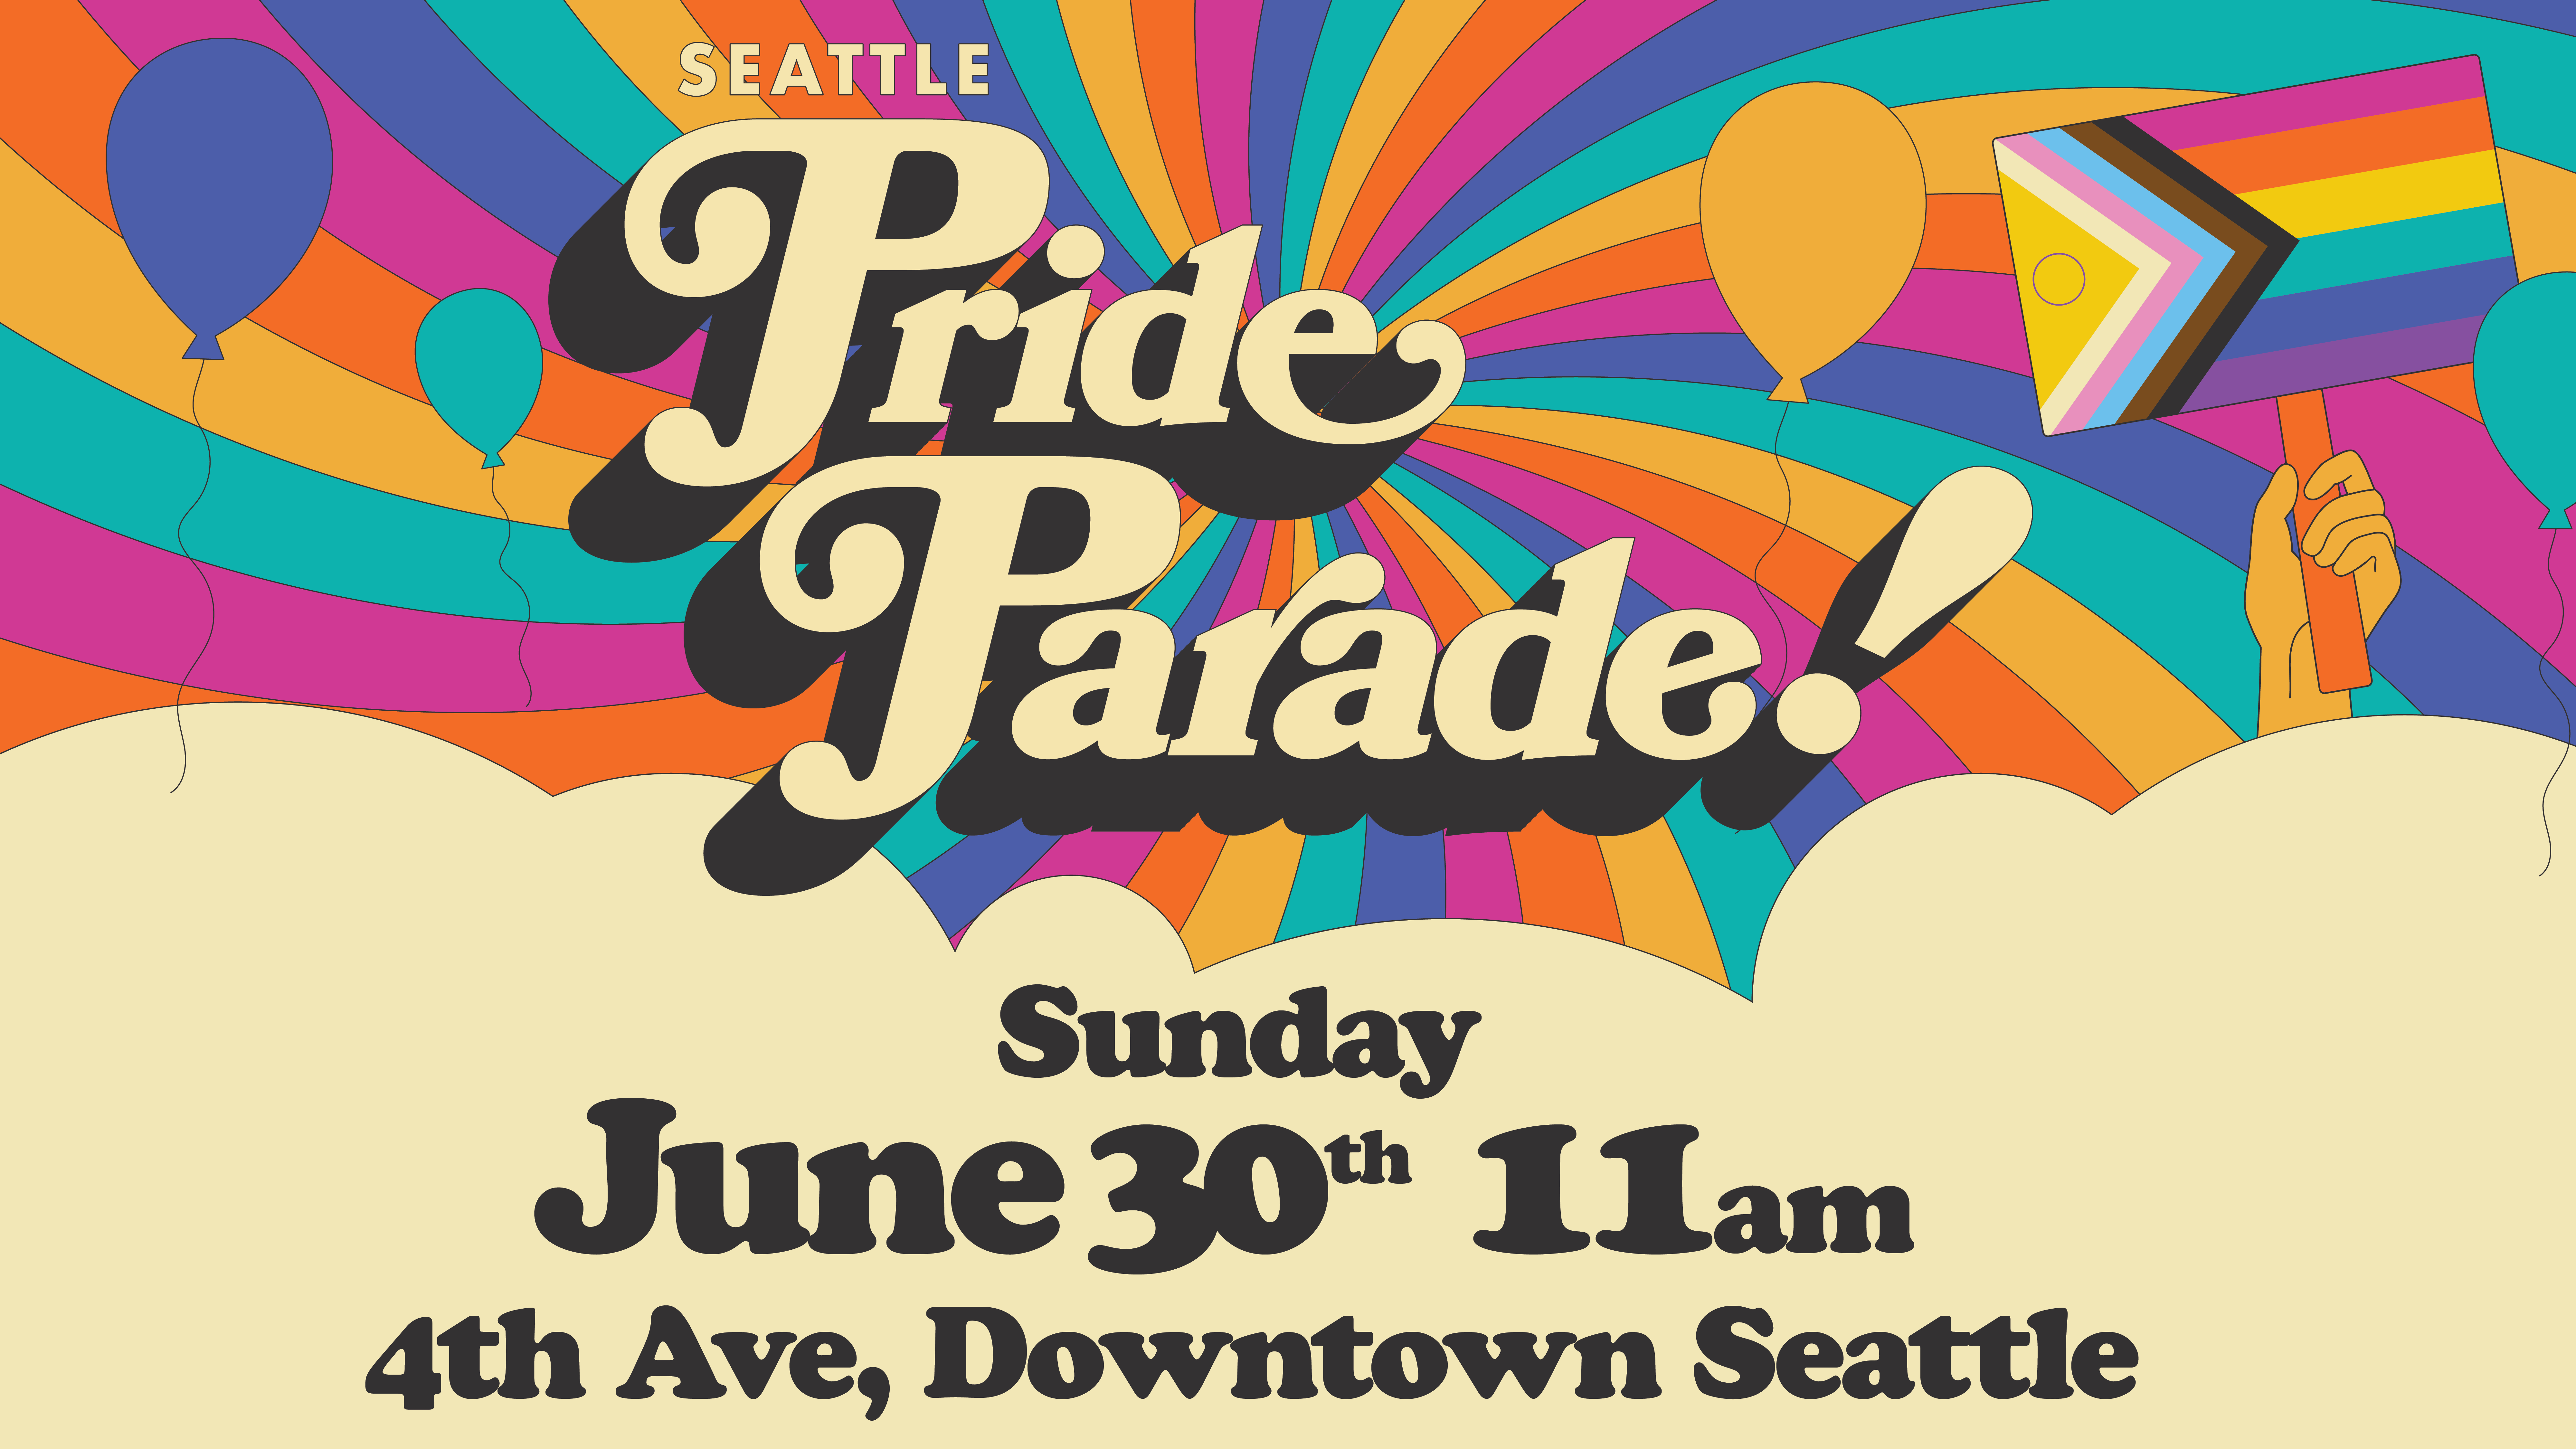 Colorful graphic promoting "Seattle Pride Parade" event in Seattle. Features a vibrant rainbow arch, baloons and a stylized Pride flag. Event details include "Saturday June 30th 11am 4th AVE, Downtown Seattle.